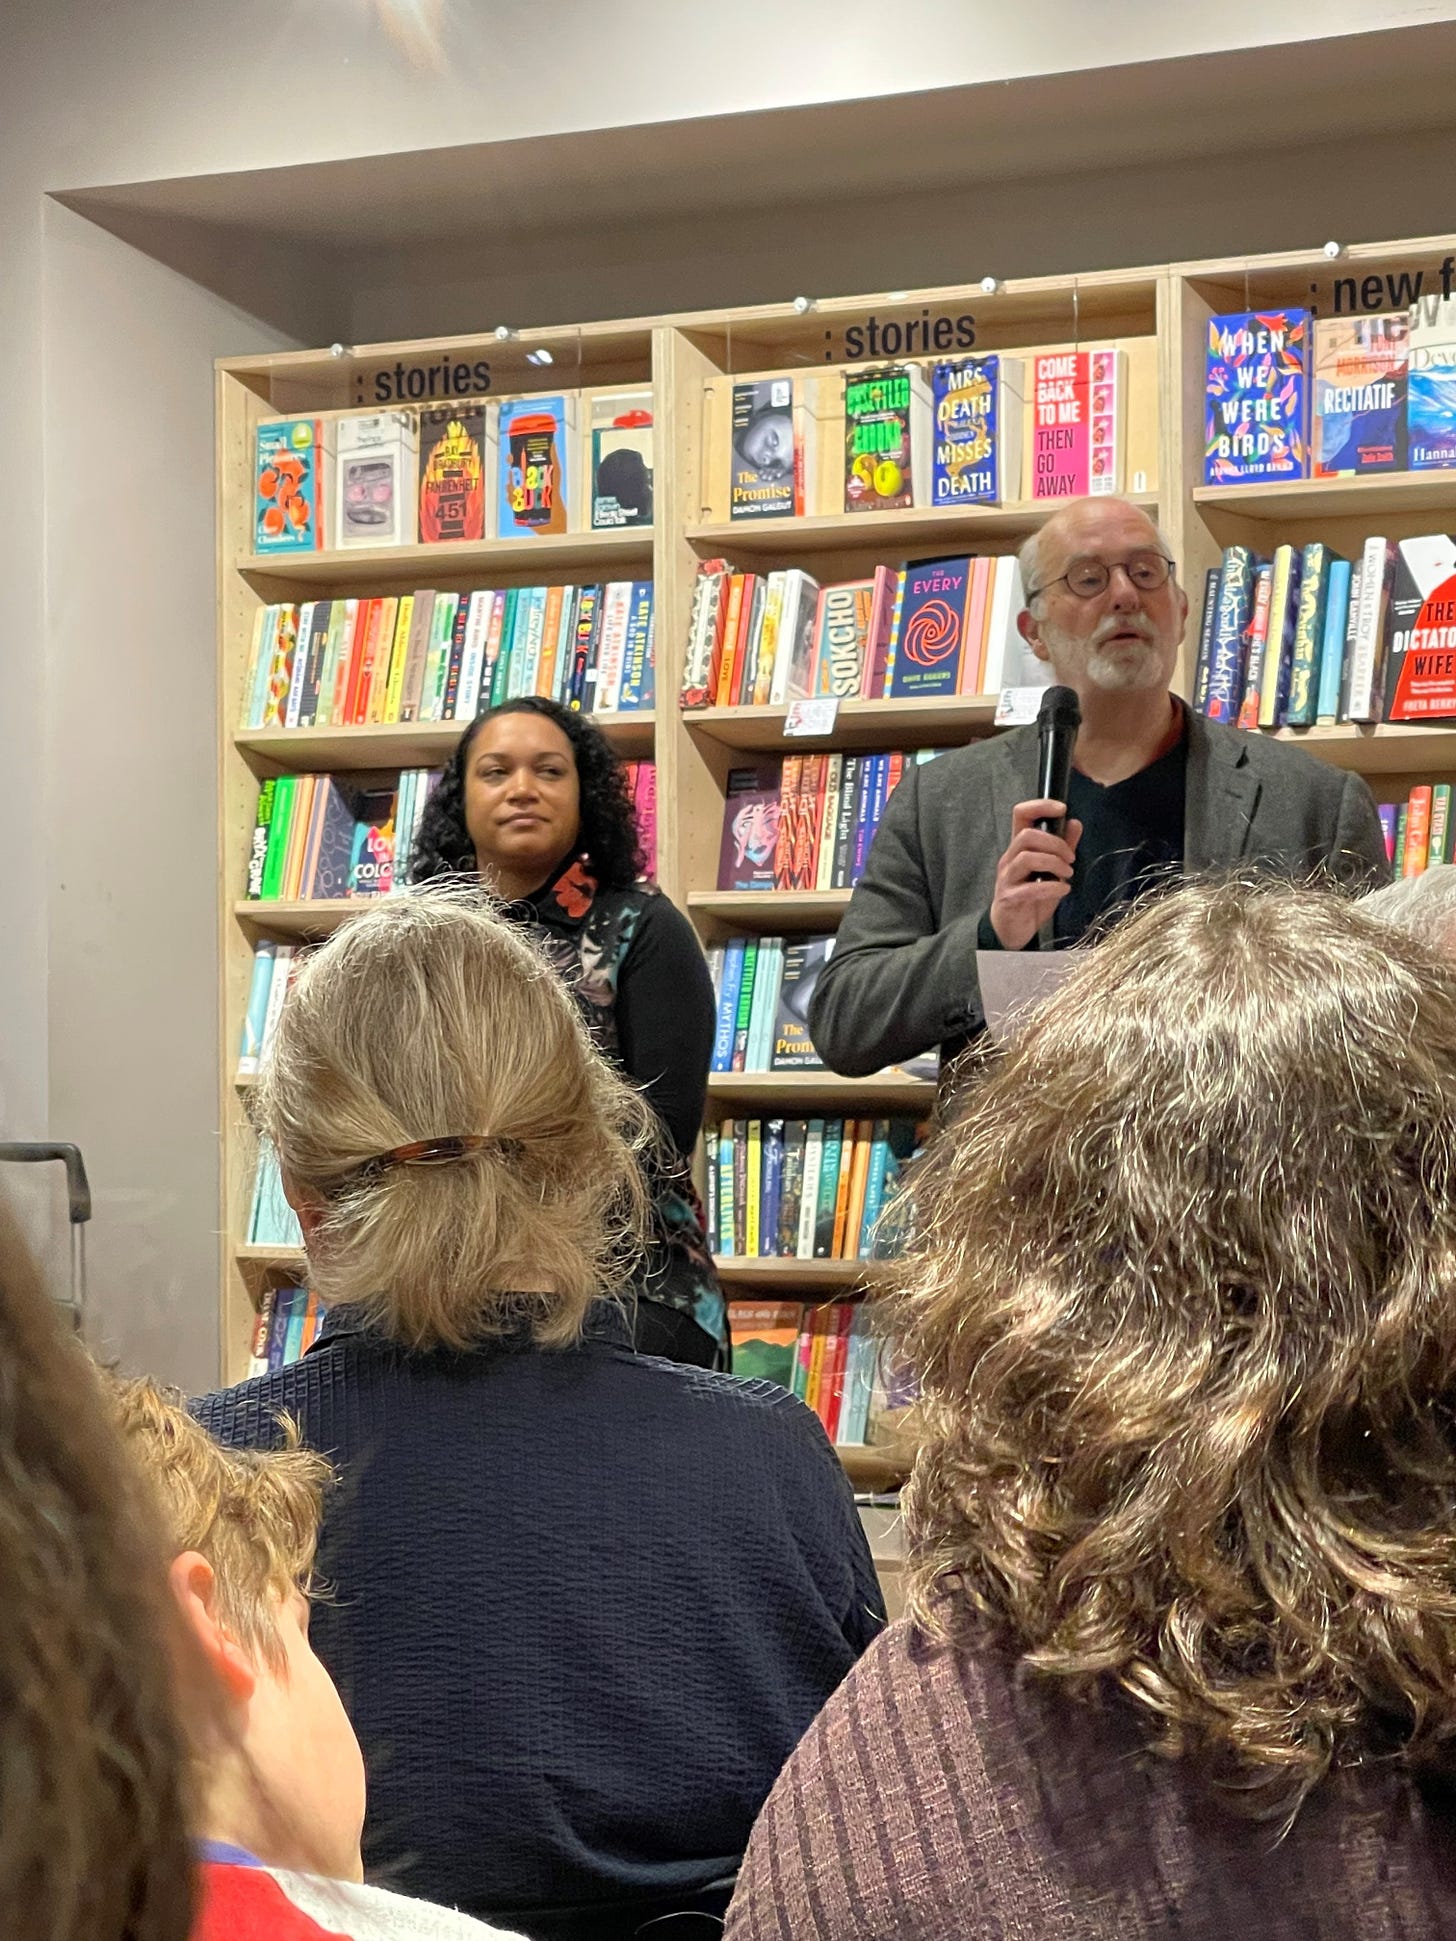 Inside Bookhaus, Clive Stevens and Cleo Lake standing in front of a set of book shelves, an audience about 50, sitting in front. Clive speaking.